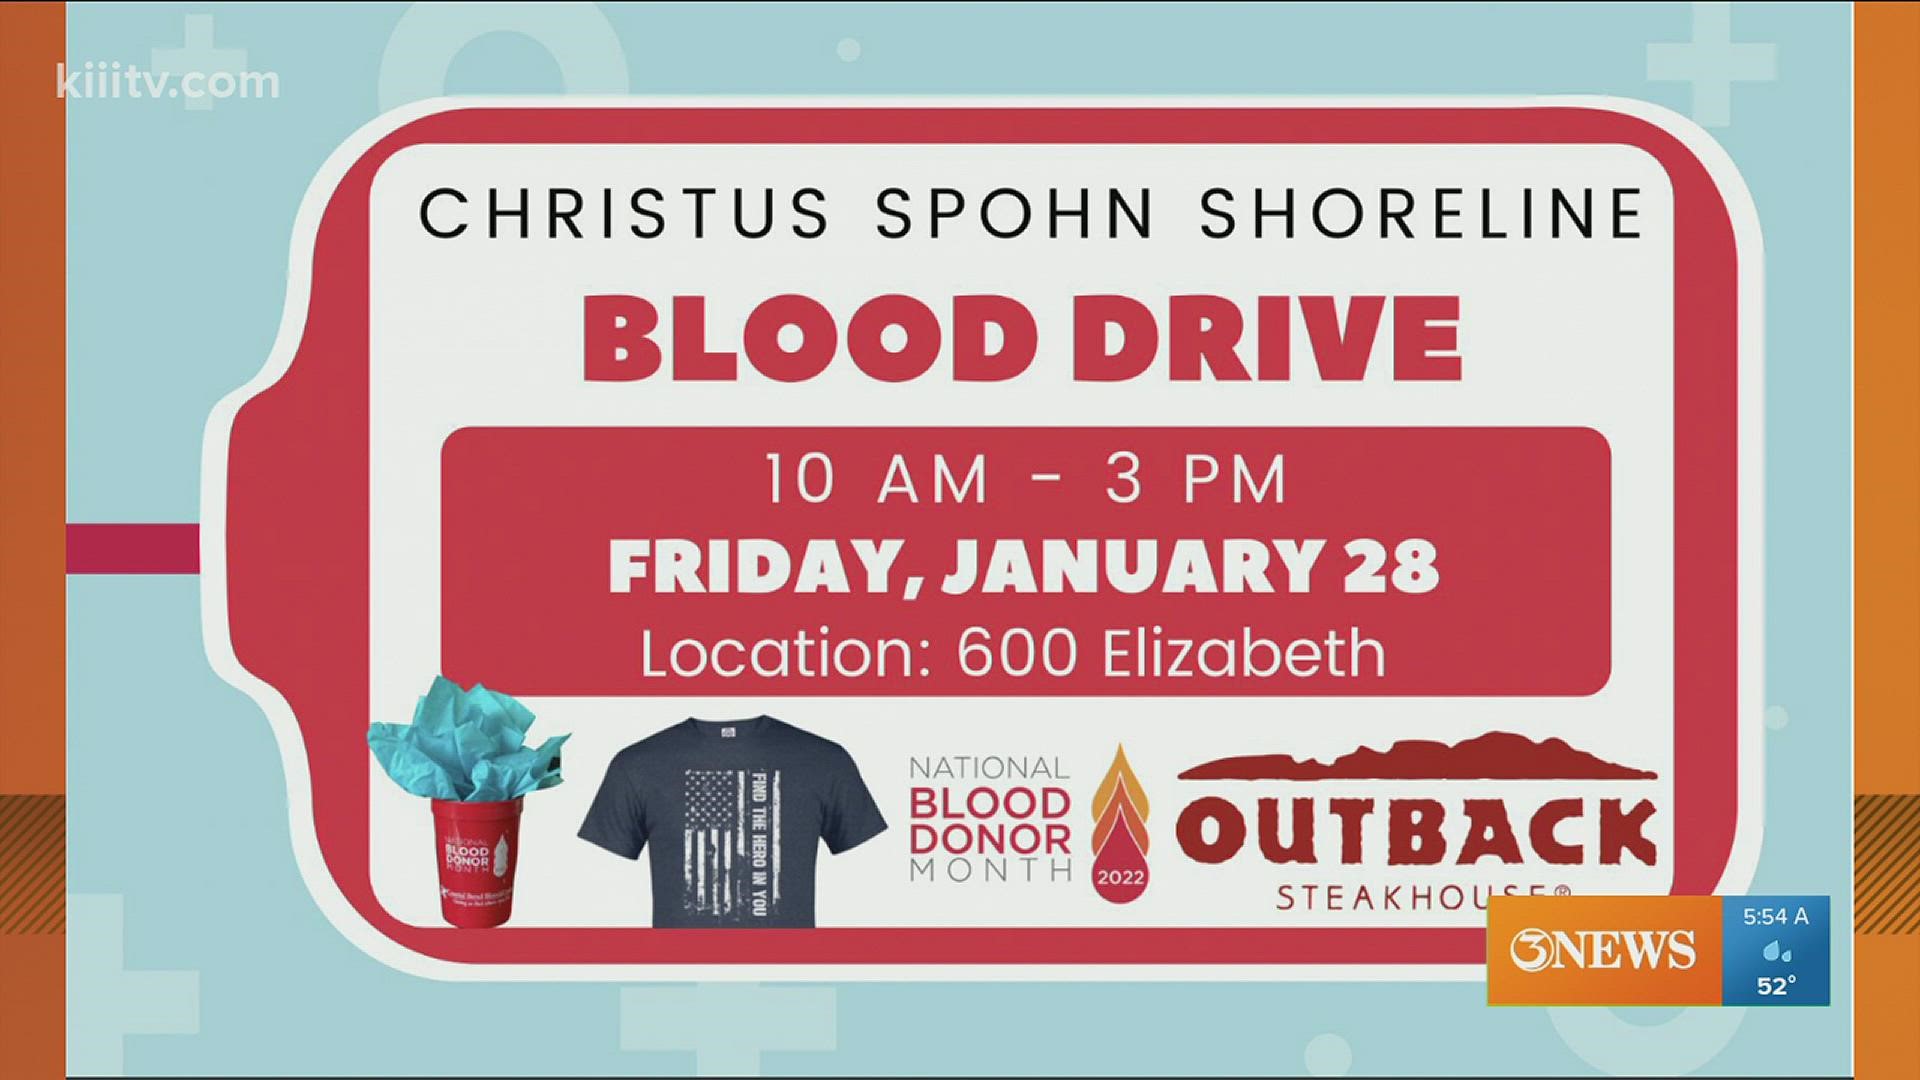 To celebrate national blood donor month, the hospital will be holding a mobile blood drive event!